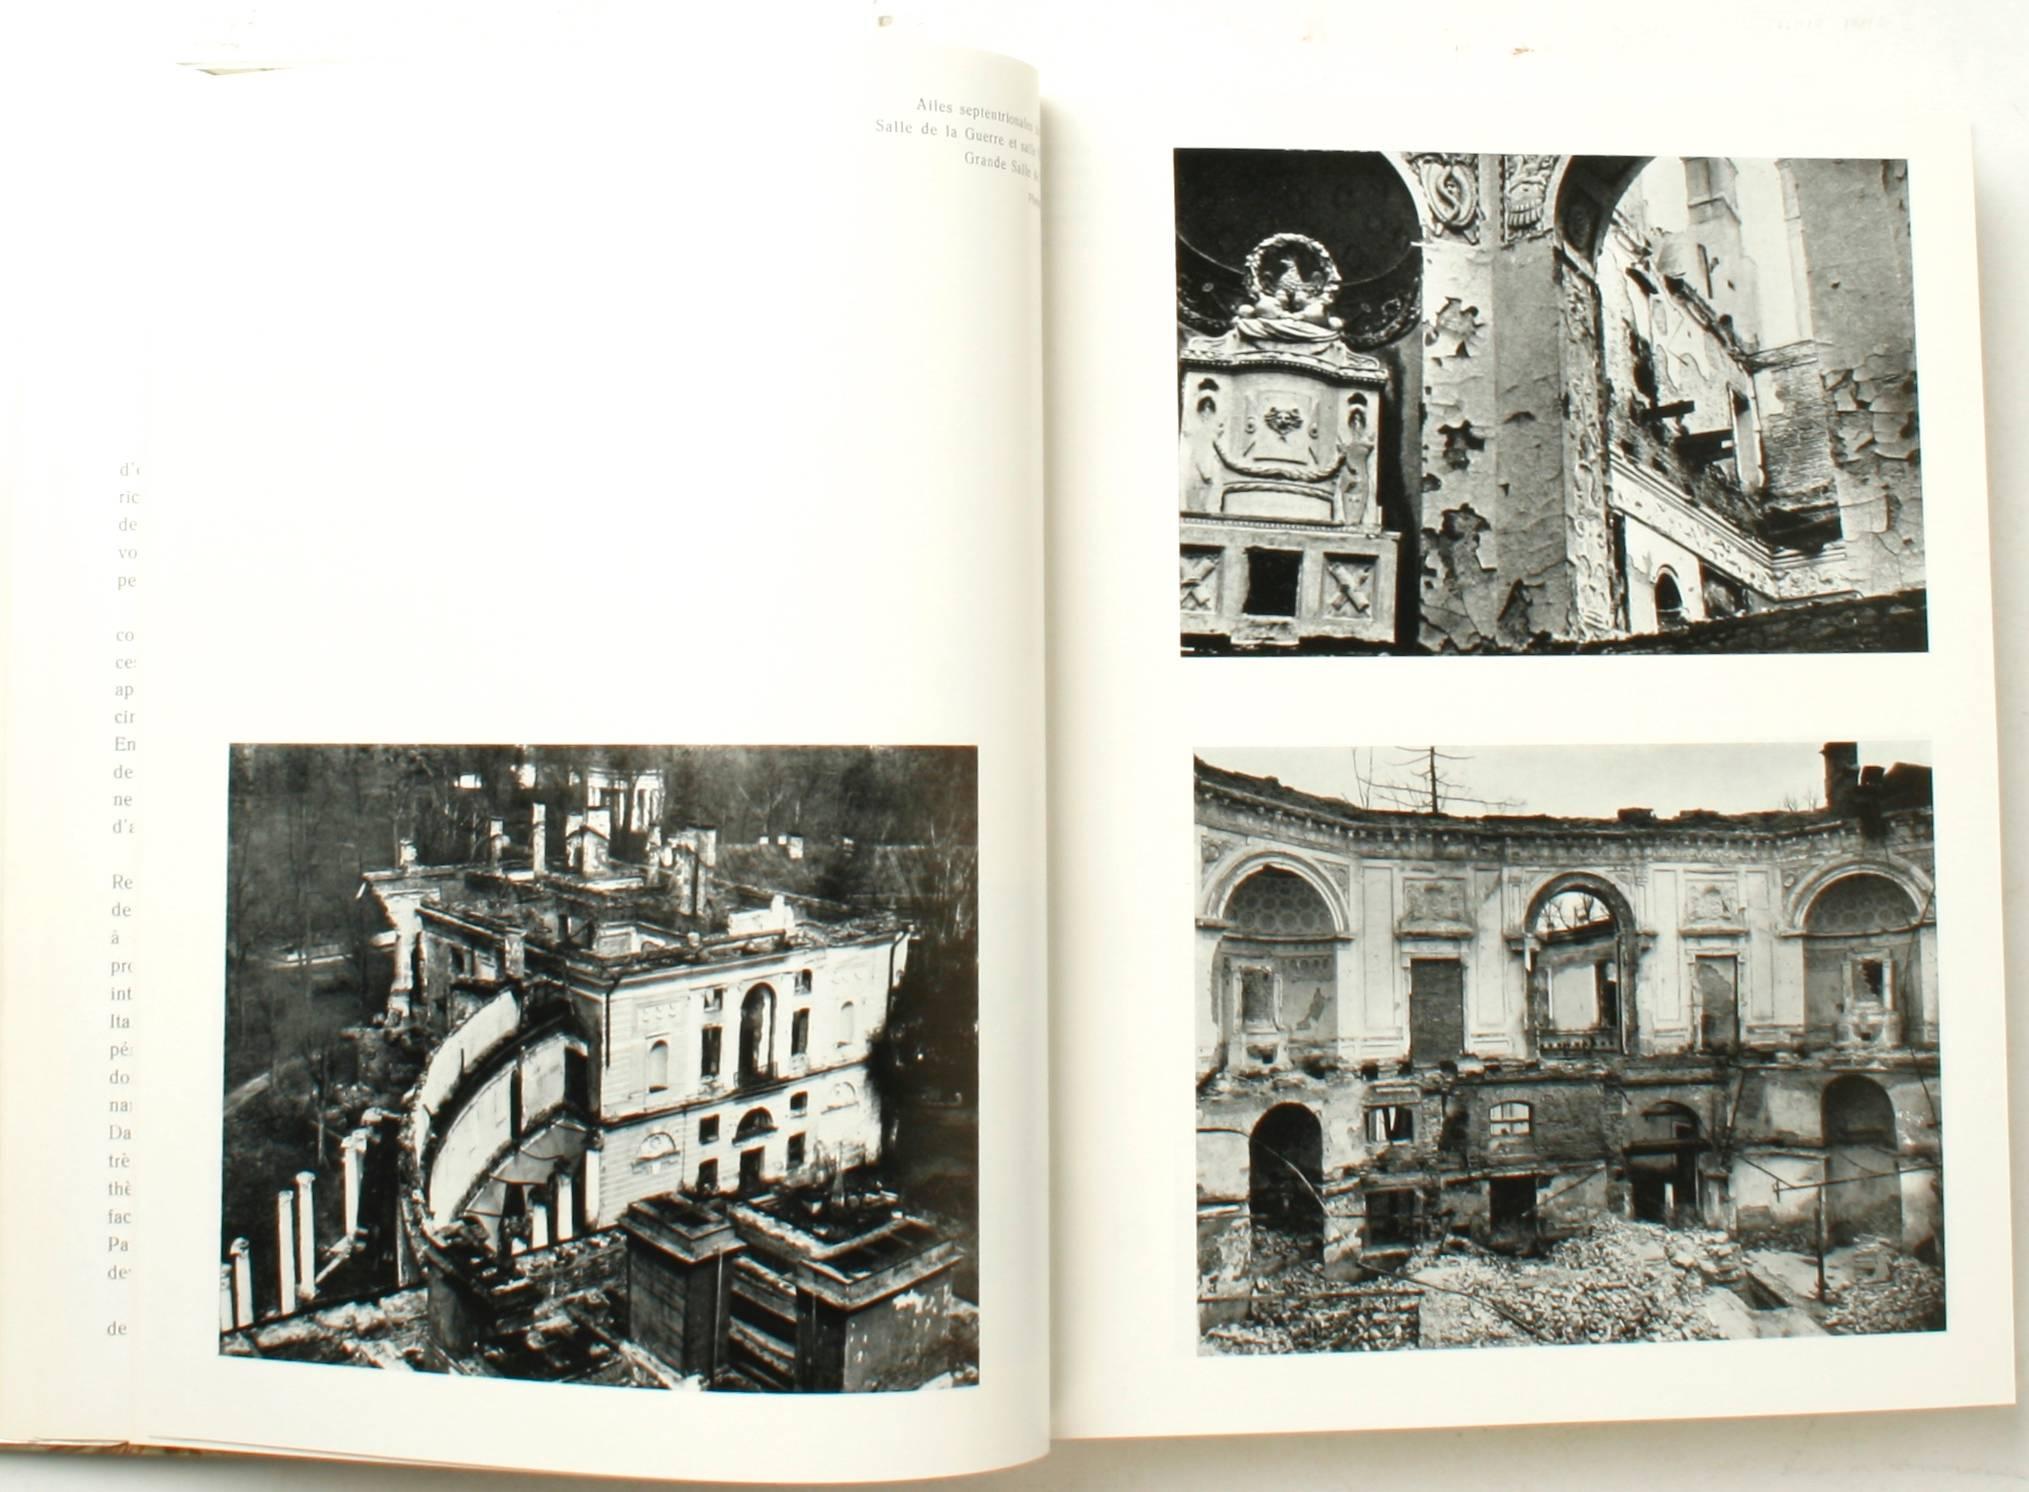 Pavlovk Le Palais et le Park (Pavlovk the Palace and the Gardens.) Leningrad: Éditions d'art Aurore, 1976. First edition in French hardcover with dust jacket. 443 pp. A beautiful book on the 18th century Russian Imperial residence built by Catherine